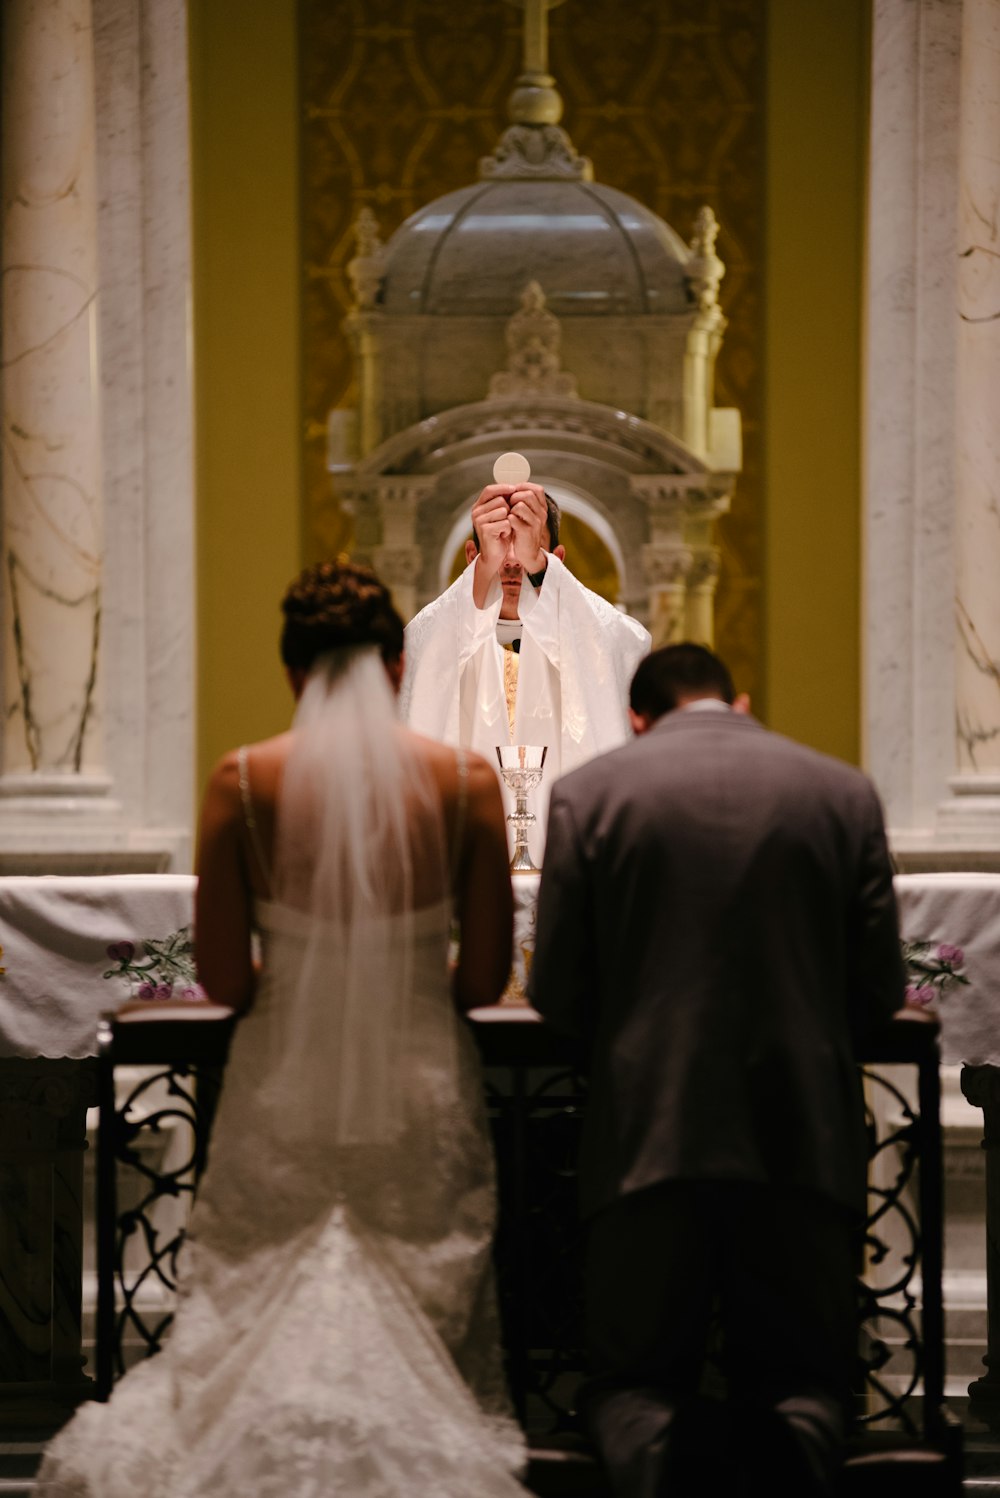 Groom And Bride Kneeling In Front Of Priest Raising The Holy